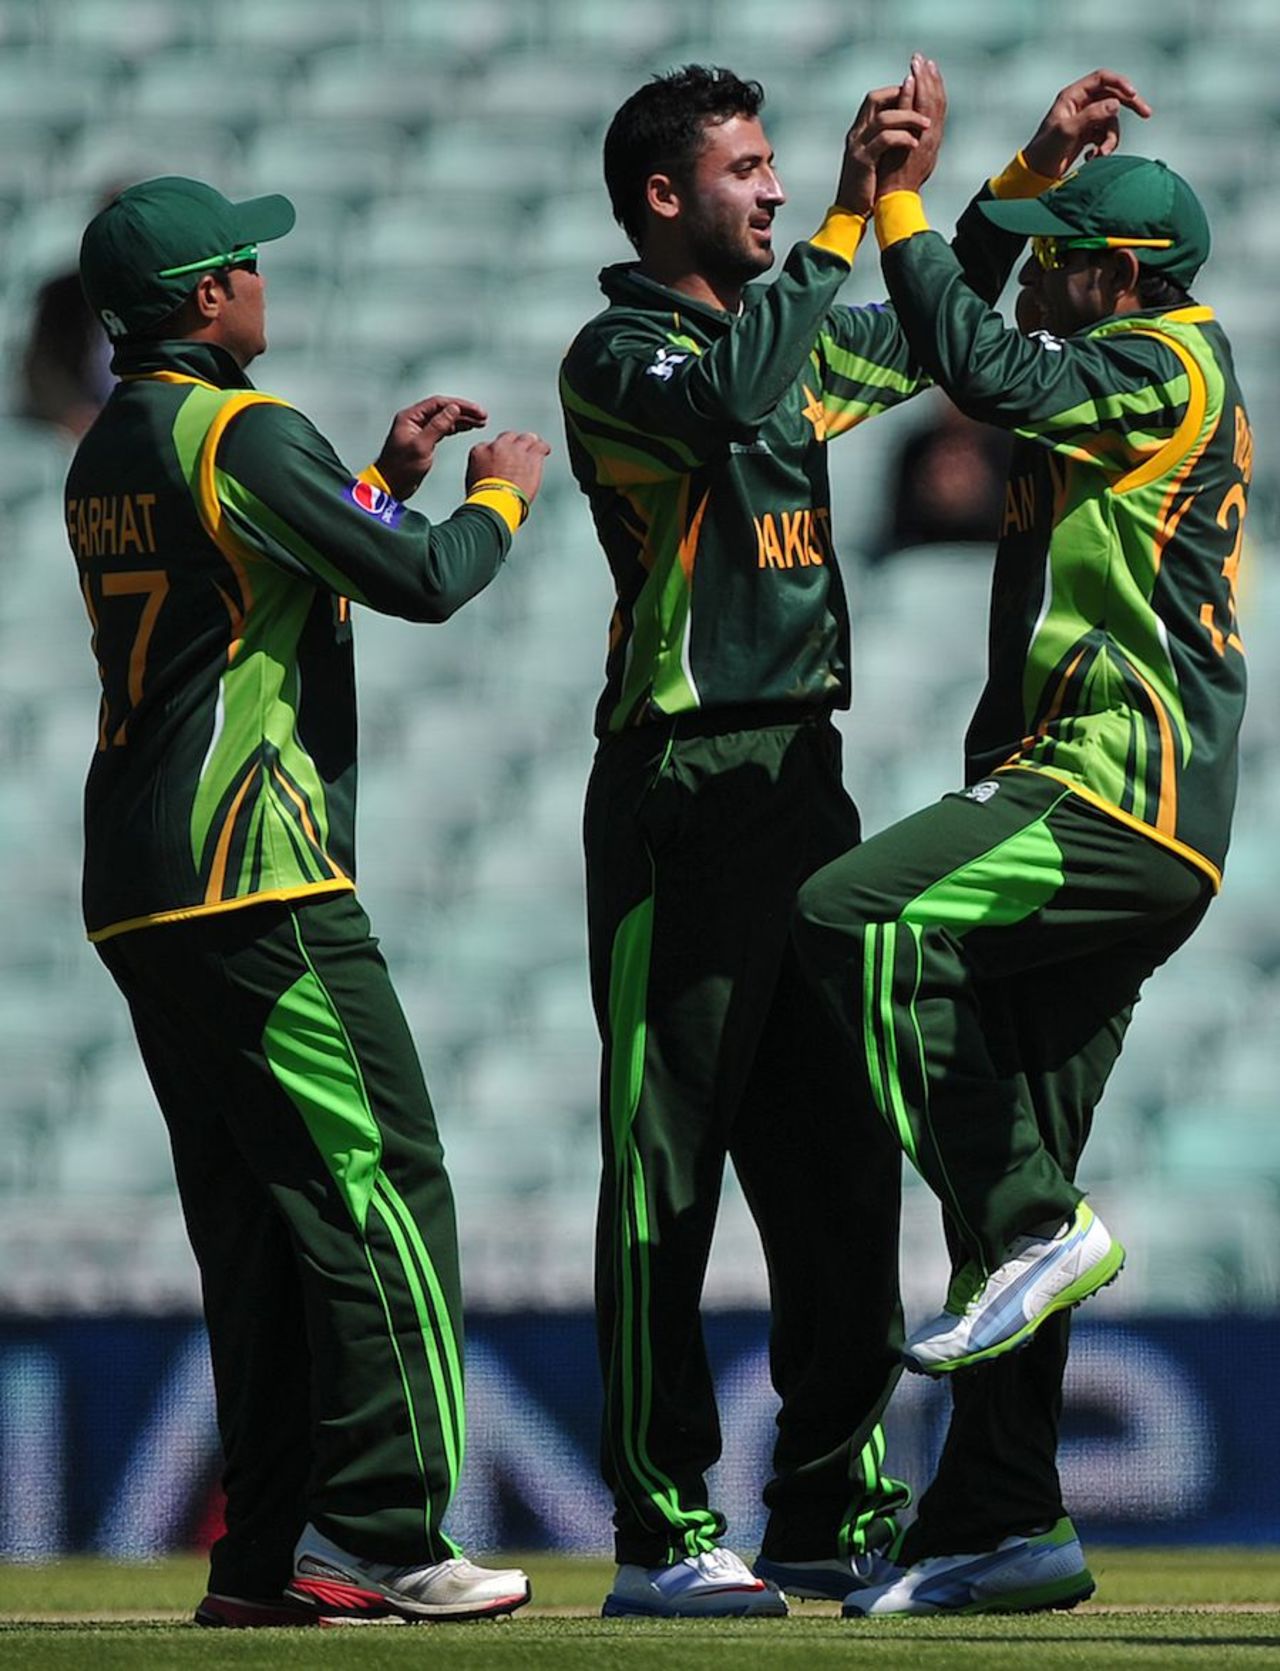 Junaid Khan trapped Hashim Amla lbw, Pakistan v South Africa, Champions Trophy warm-up, The Oval, June 3, 2013